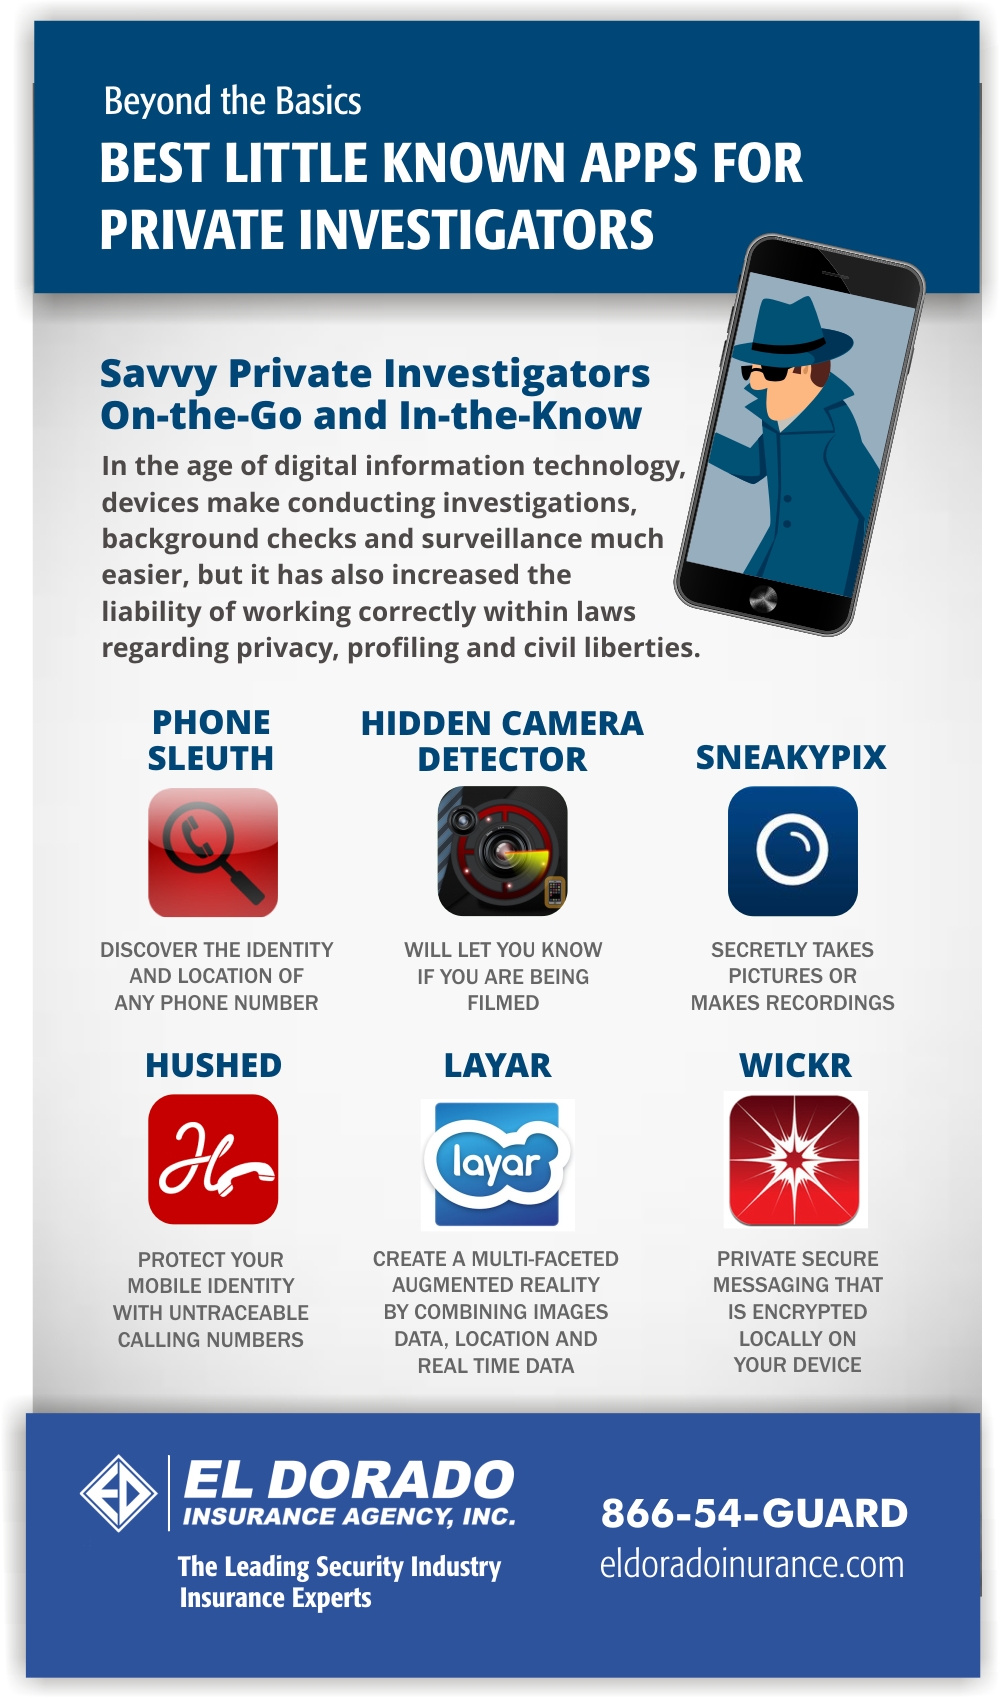 [Infographic] Best Little-Known Mobile Apps for Private Investigators